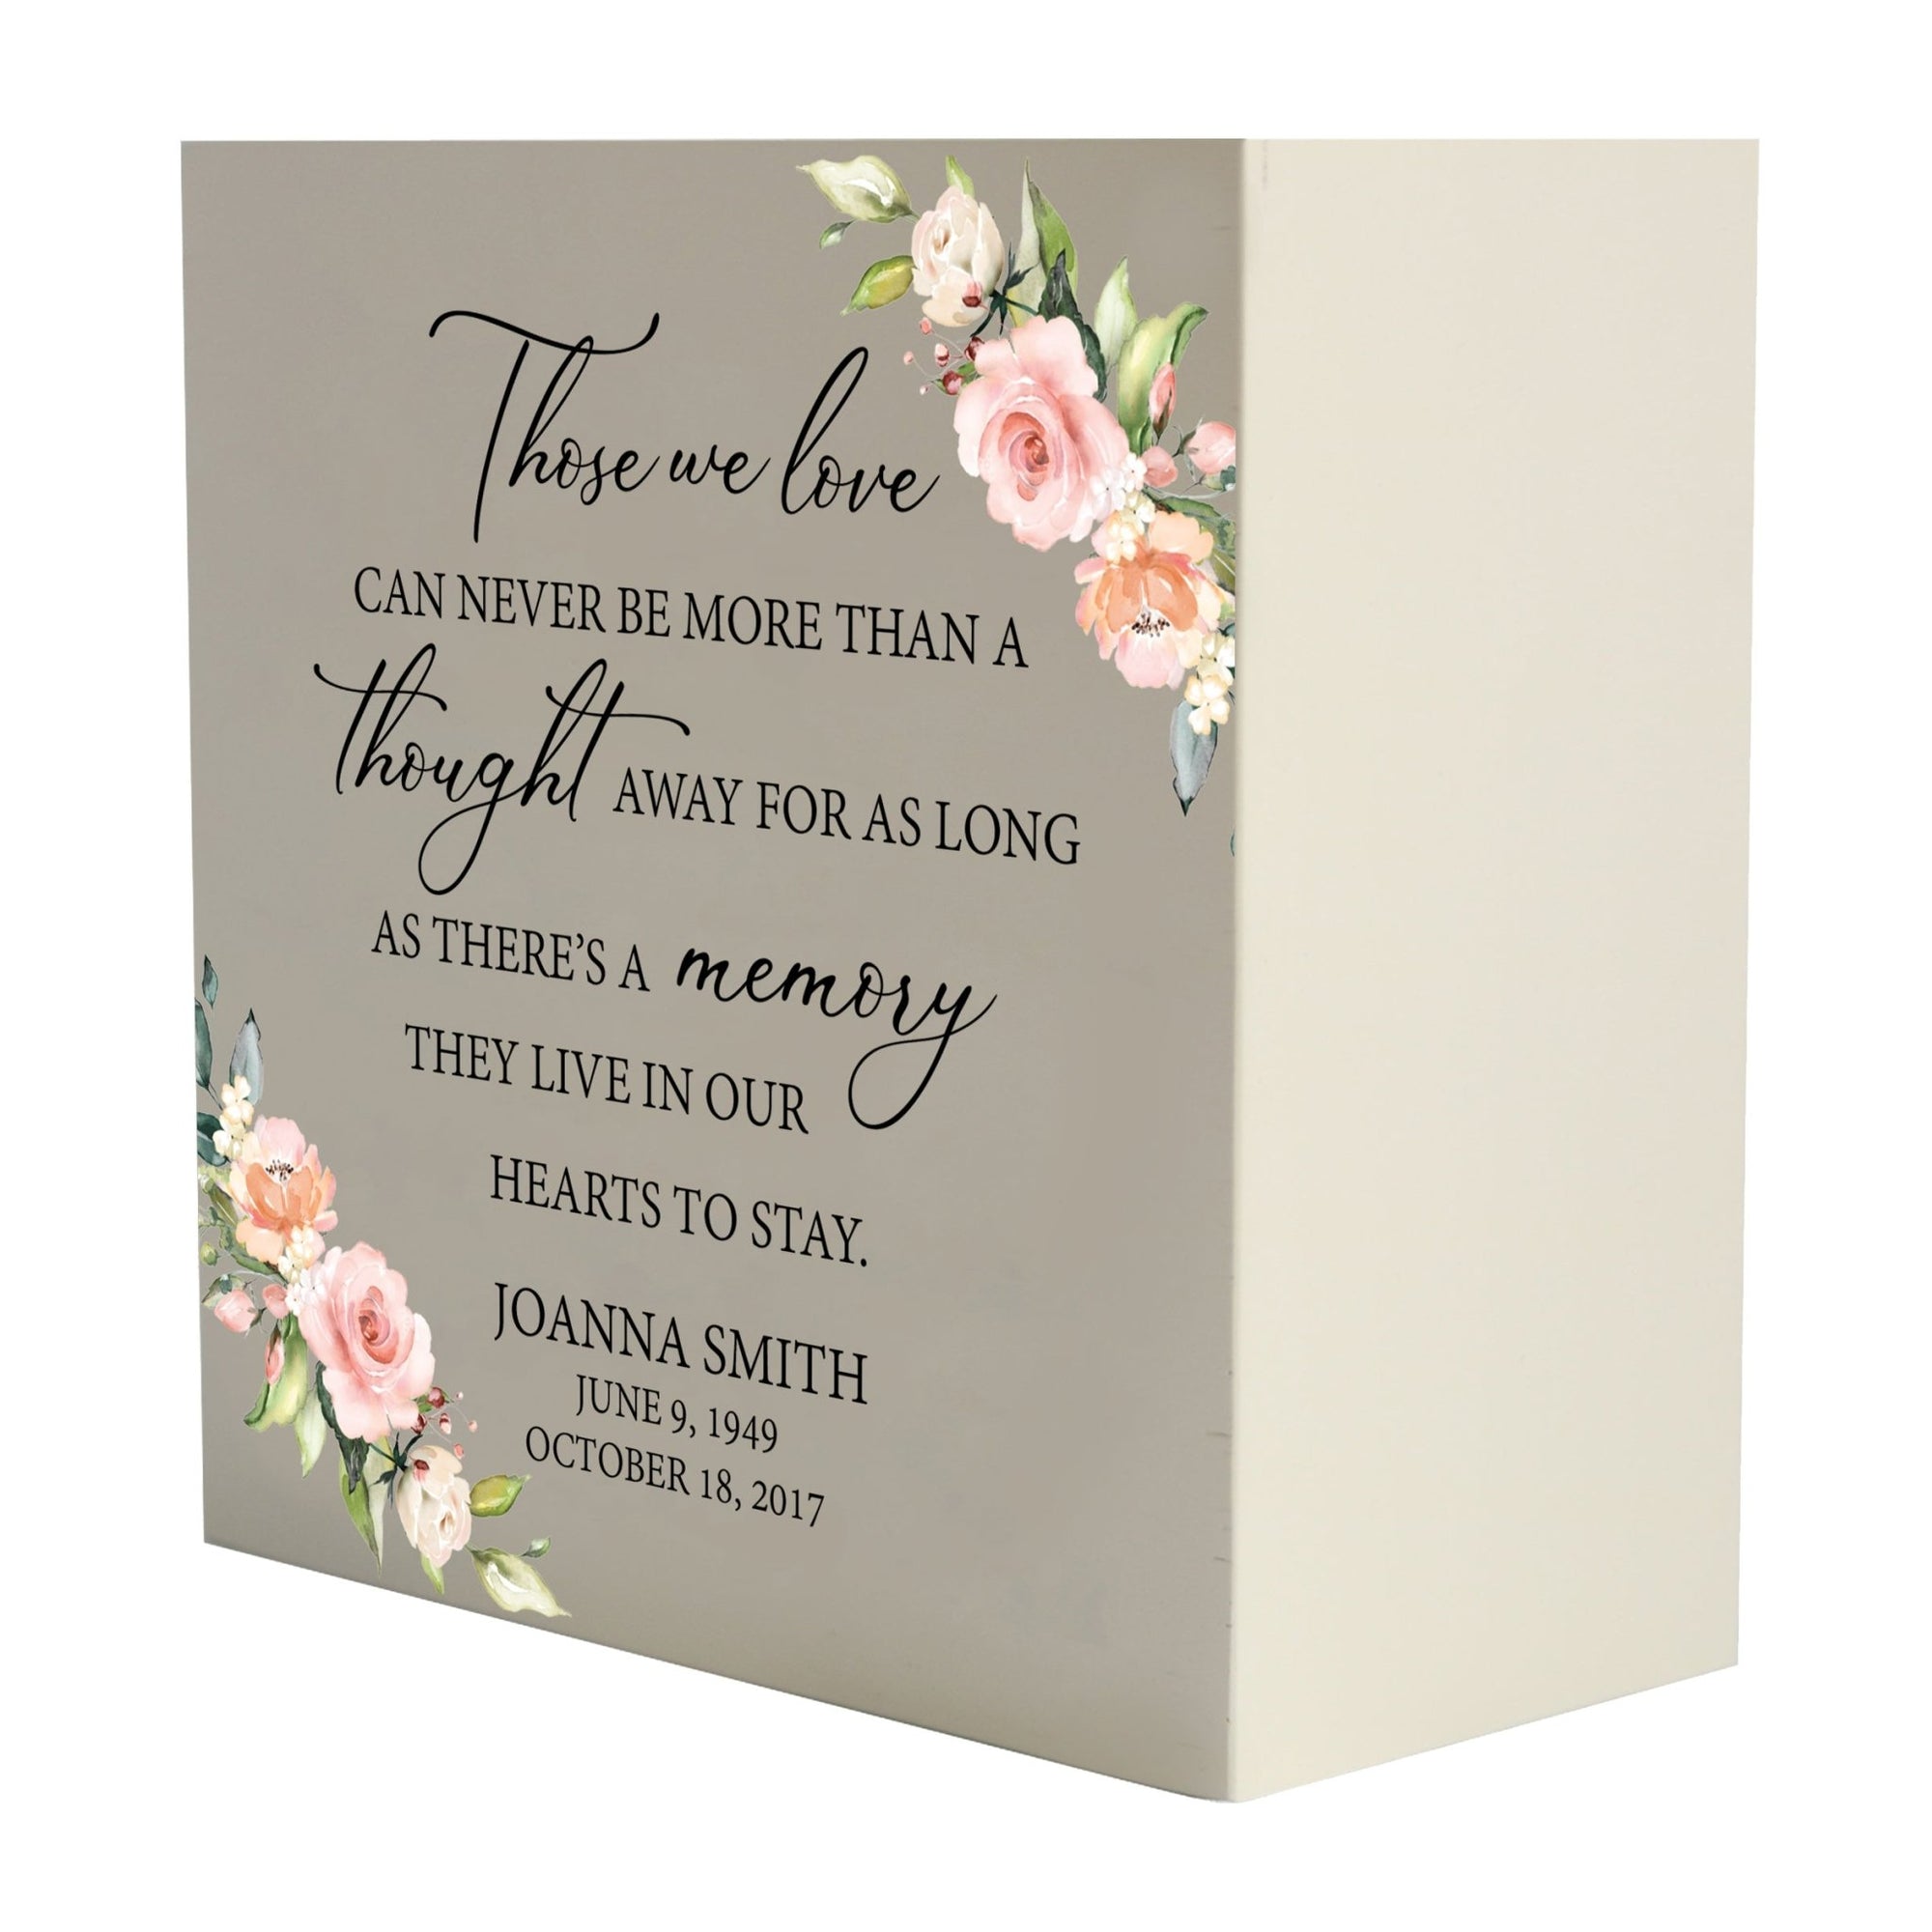 Personalized Modern Inspirational Memorial Wooden Shadow Box and Urn 6x6 holds 53 cu in of Human Ashes - Those We Love (Ivory) - LifeSong Milestones